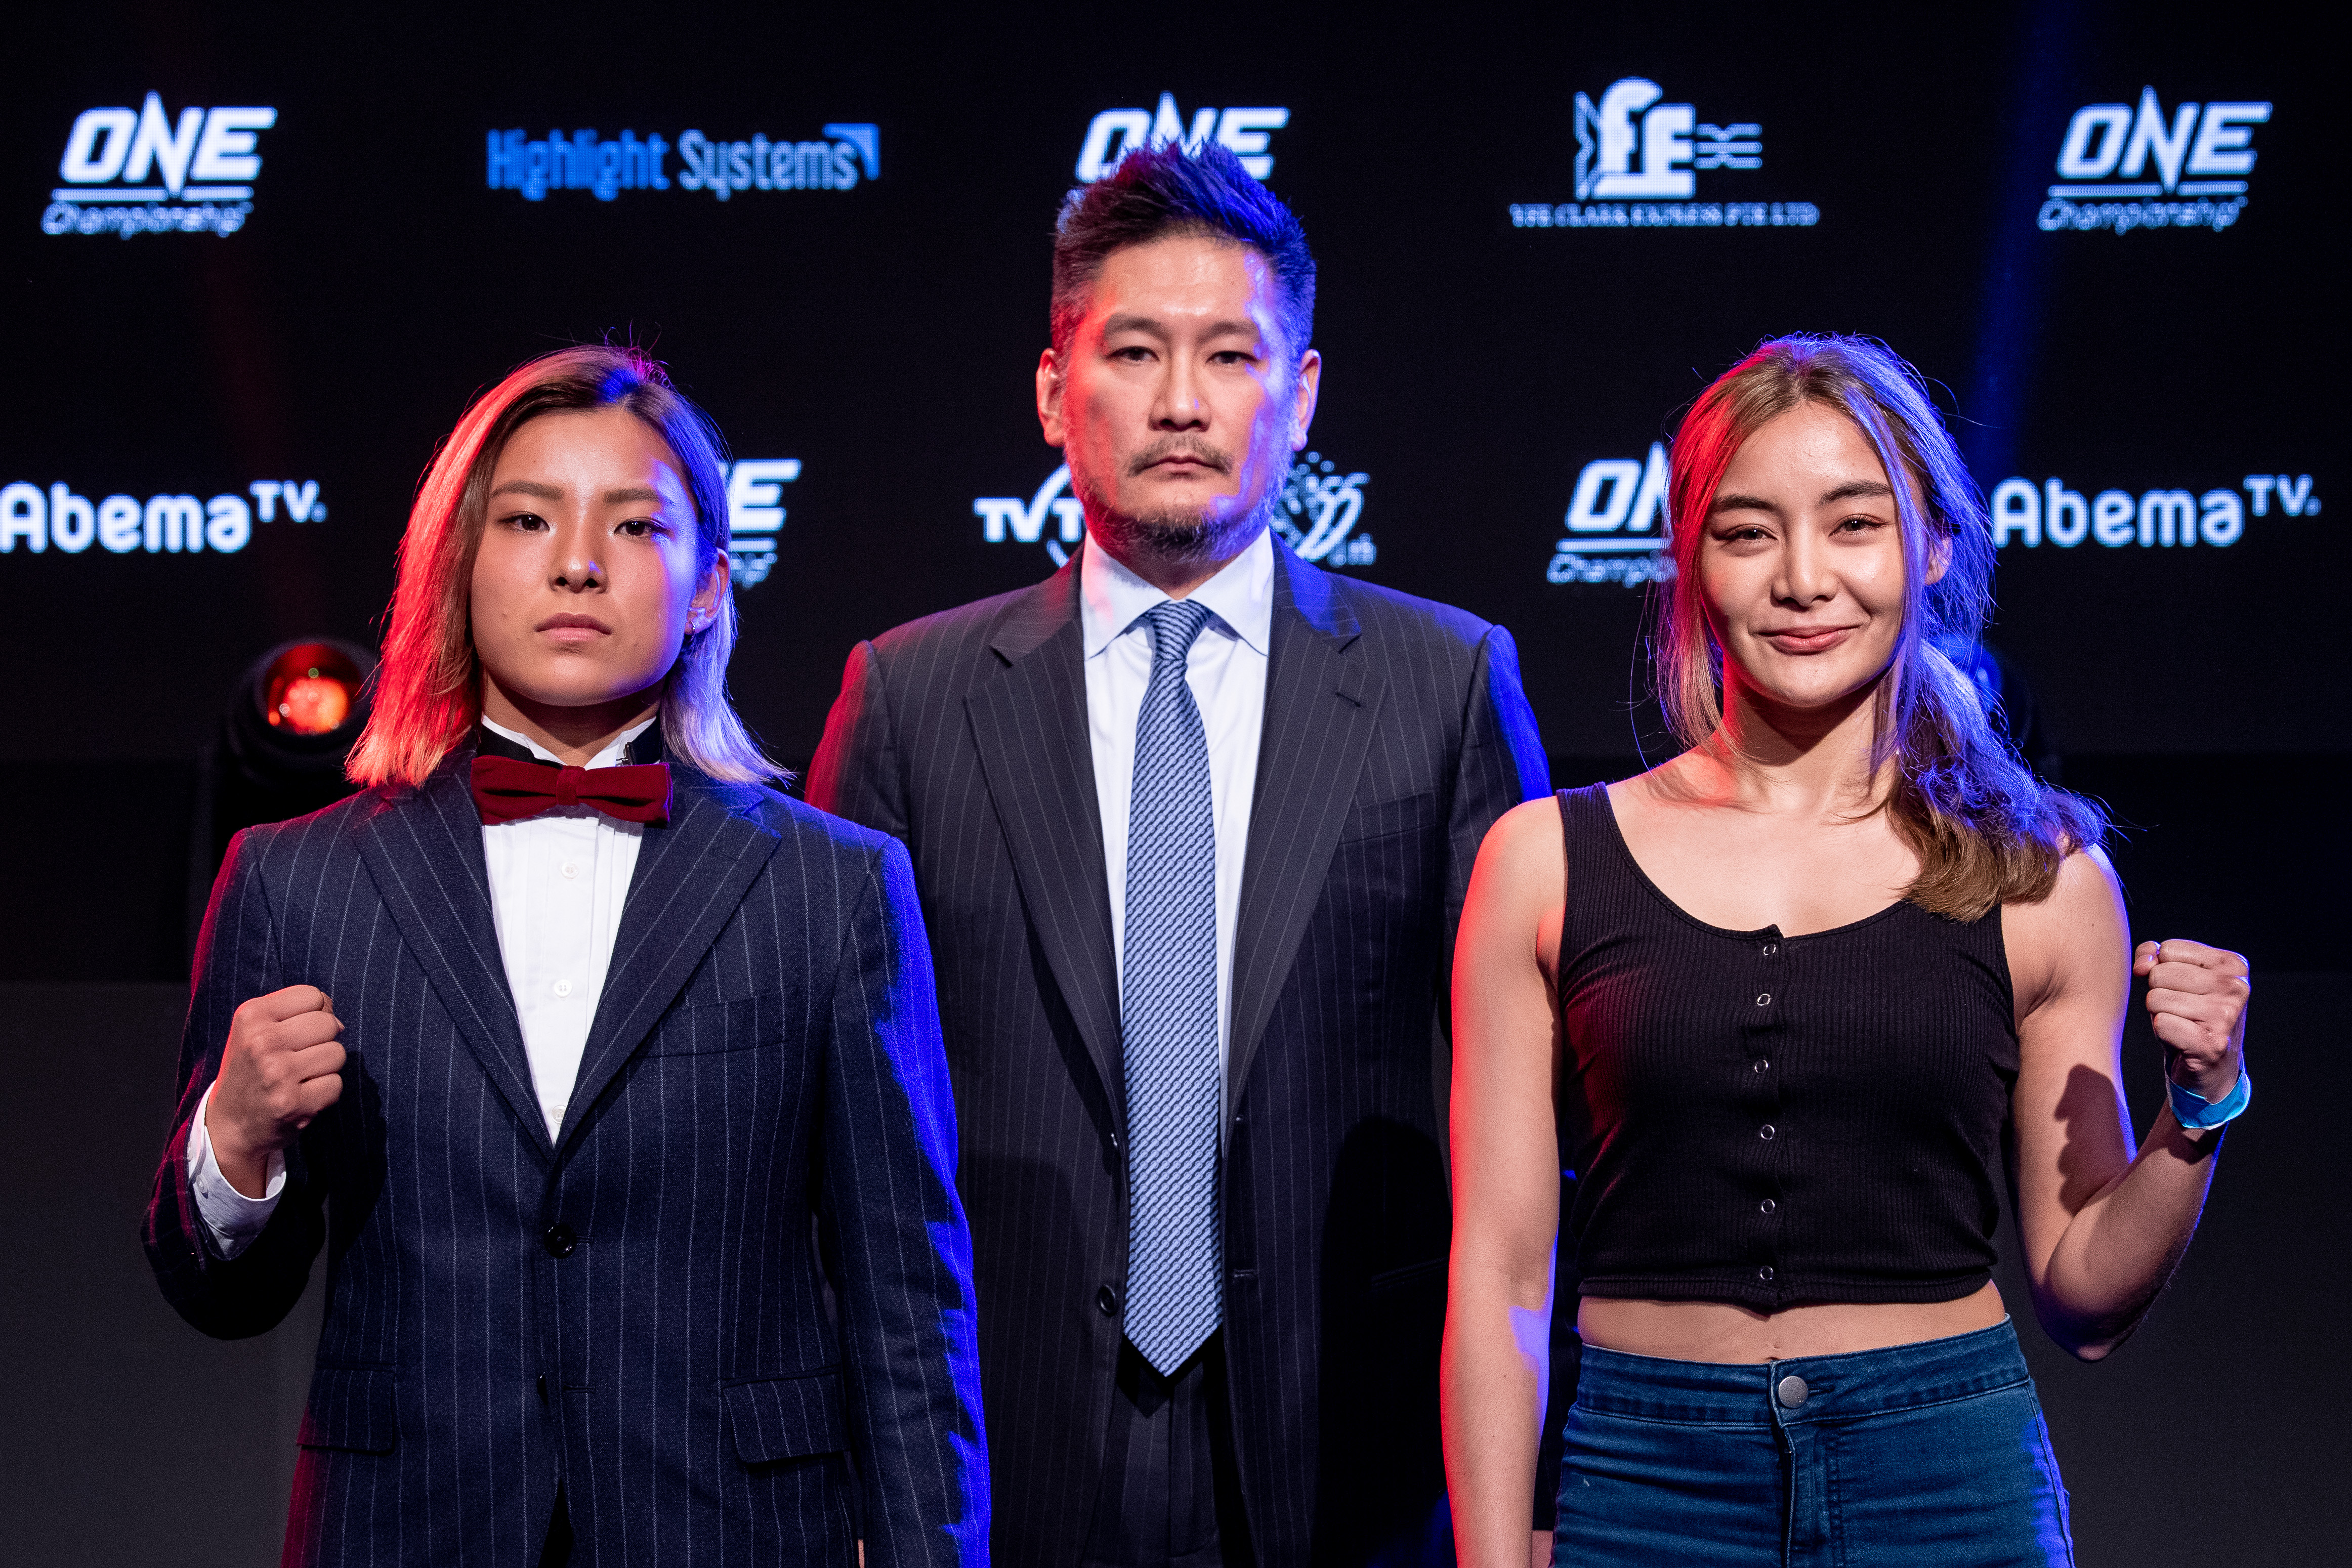 Japan's Itsuki Hirata earns 2nd ONE Championship win, submits Rika Ishige at 'ONE: Century 世紀' in Tokyo